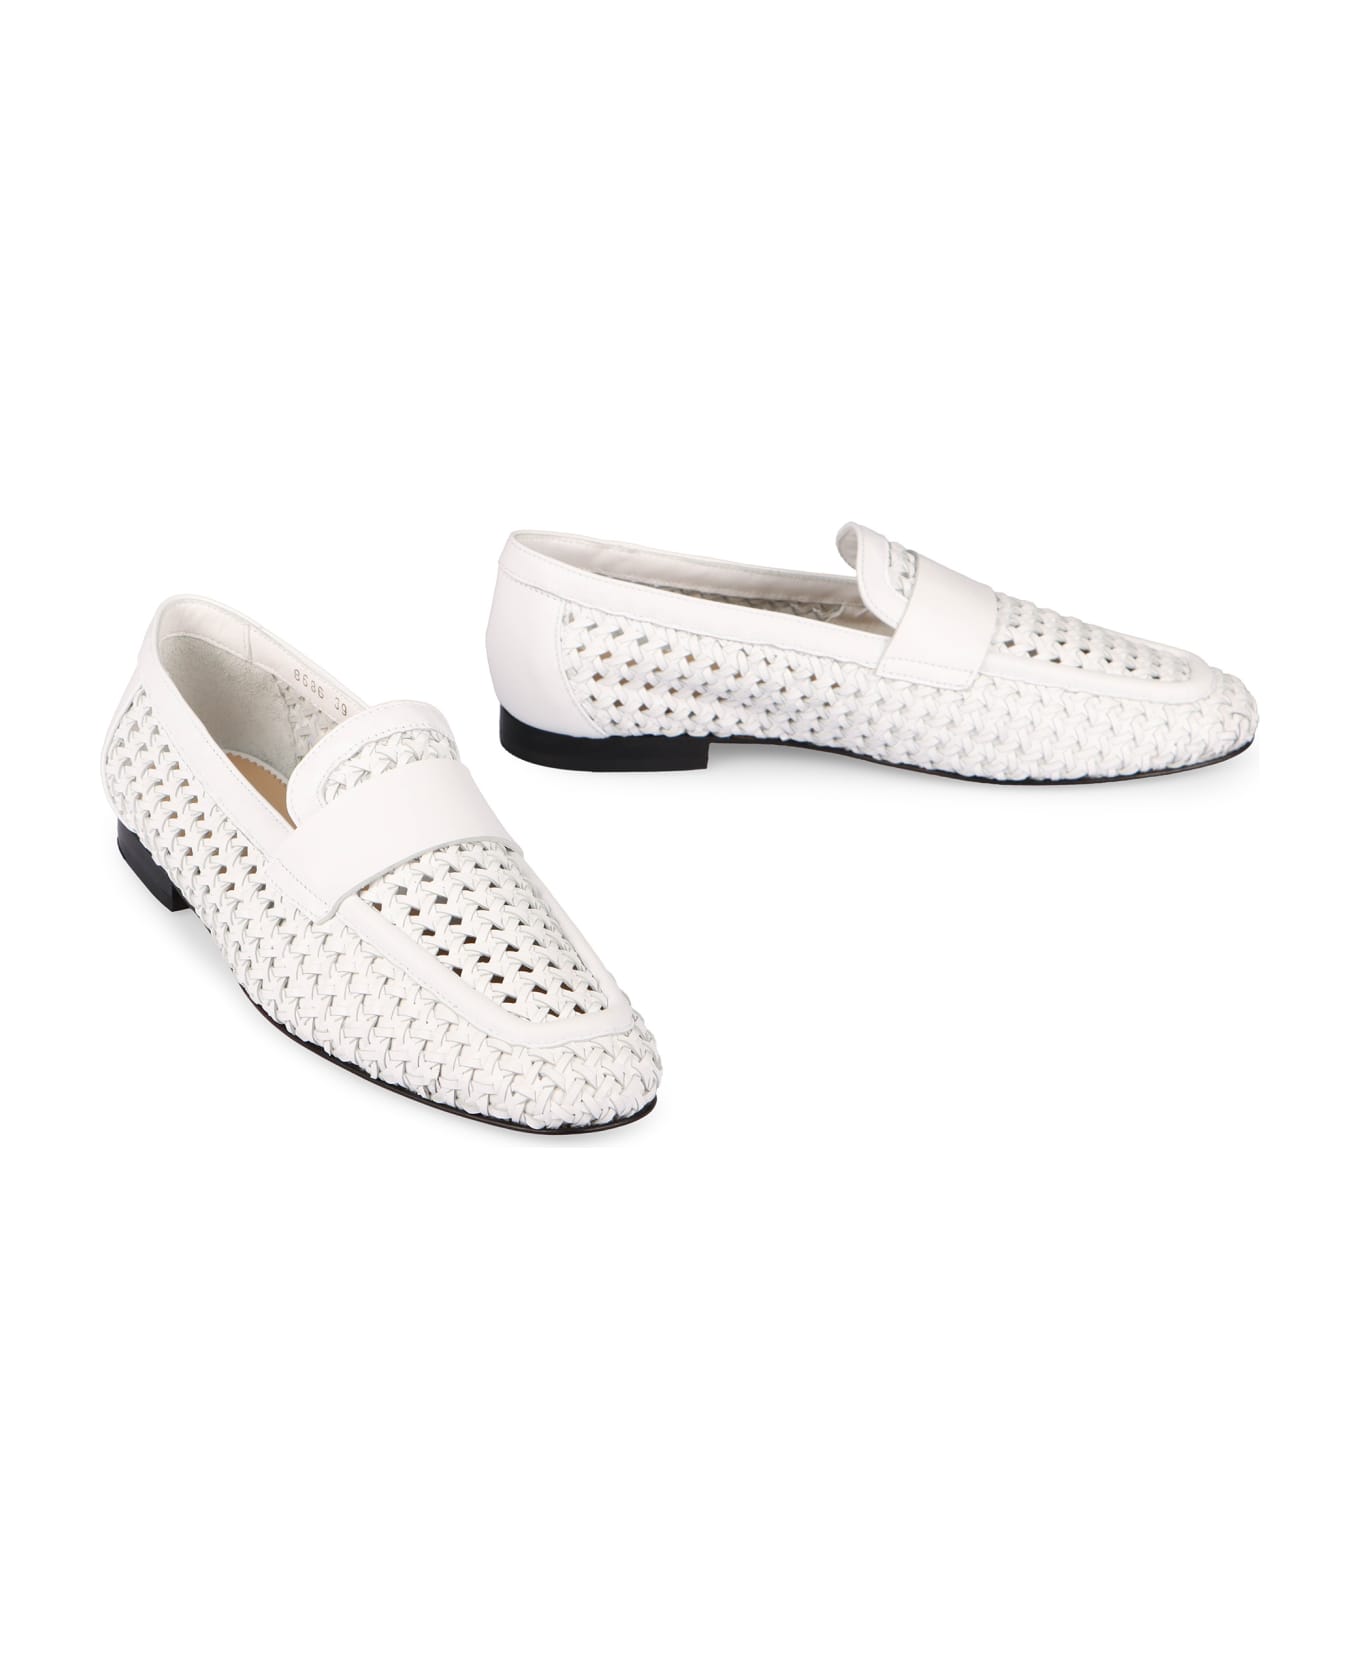 Doucal's Leather Loafers - White フラットシューズ